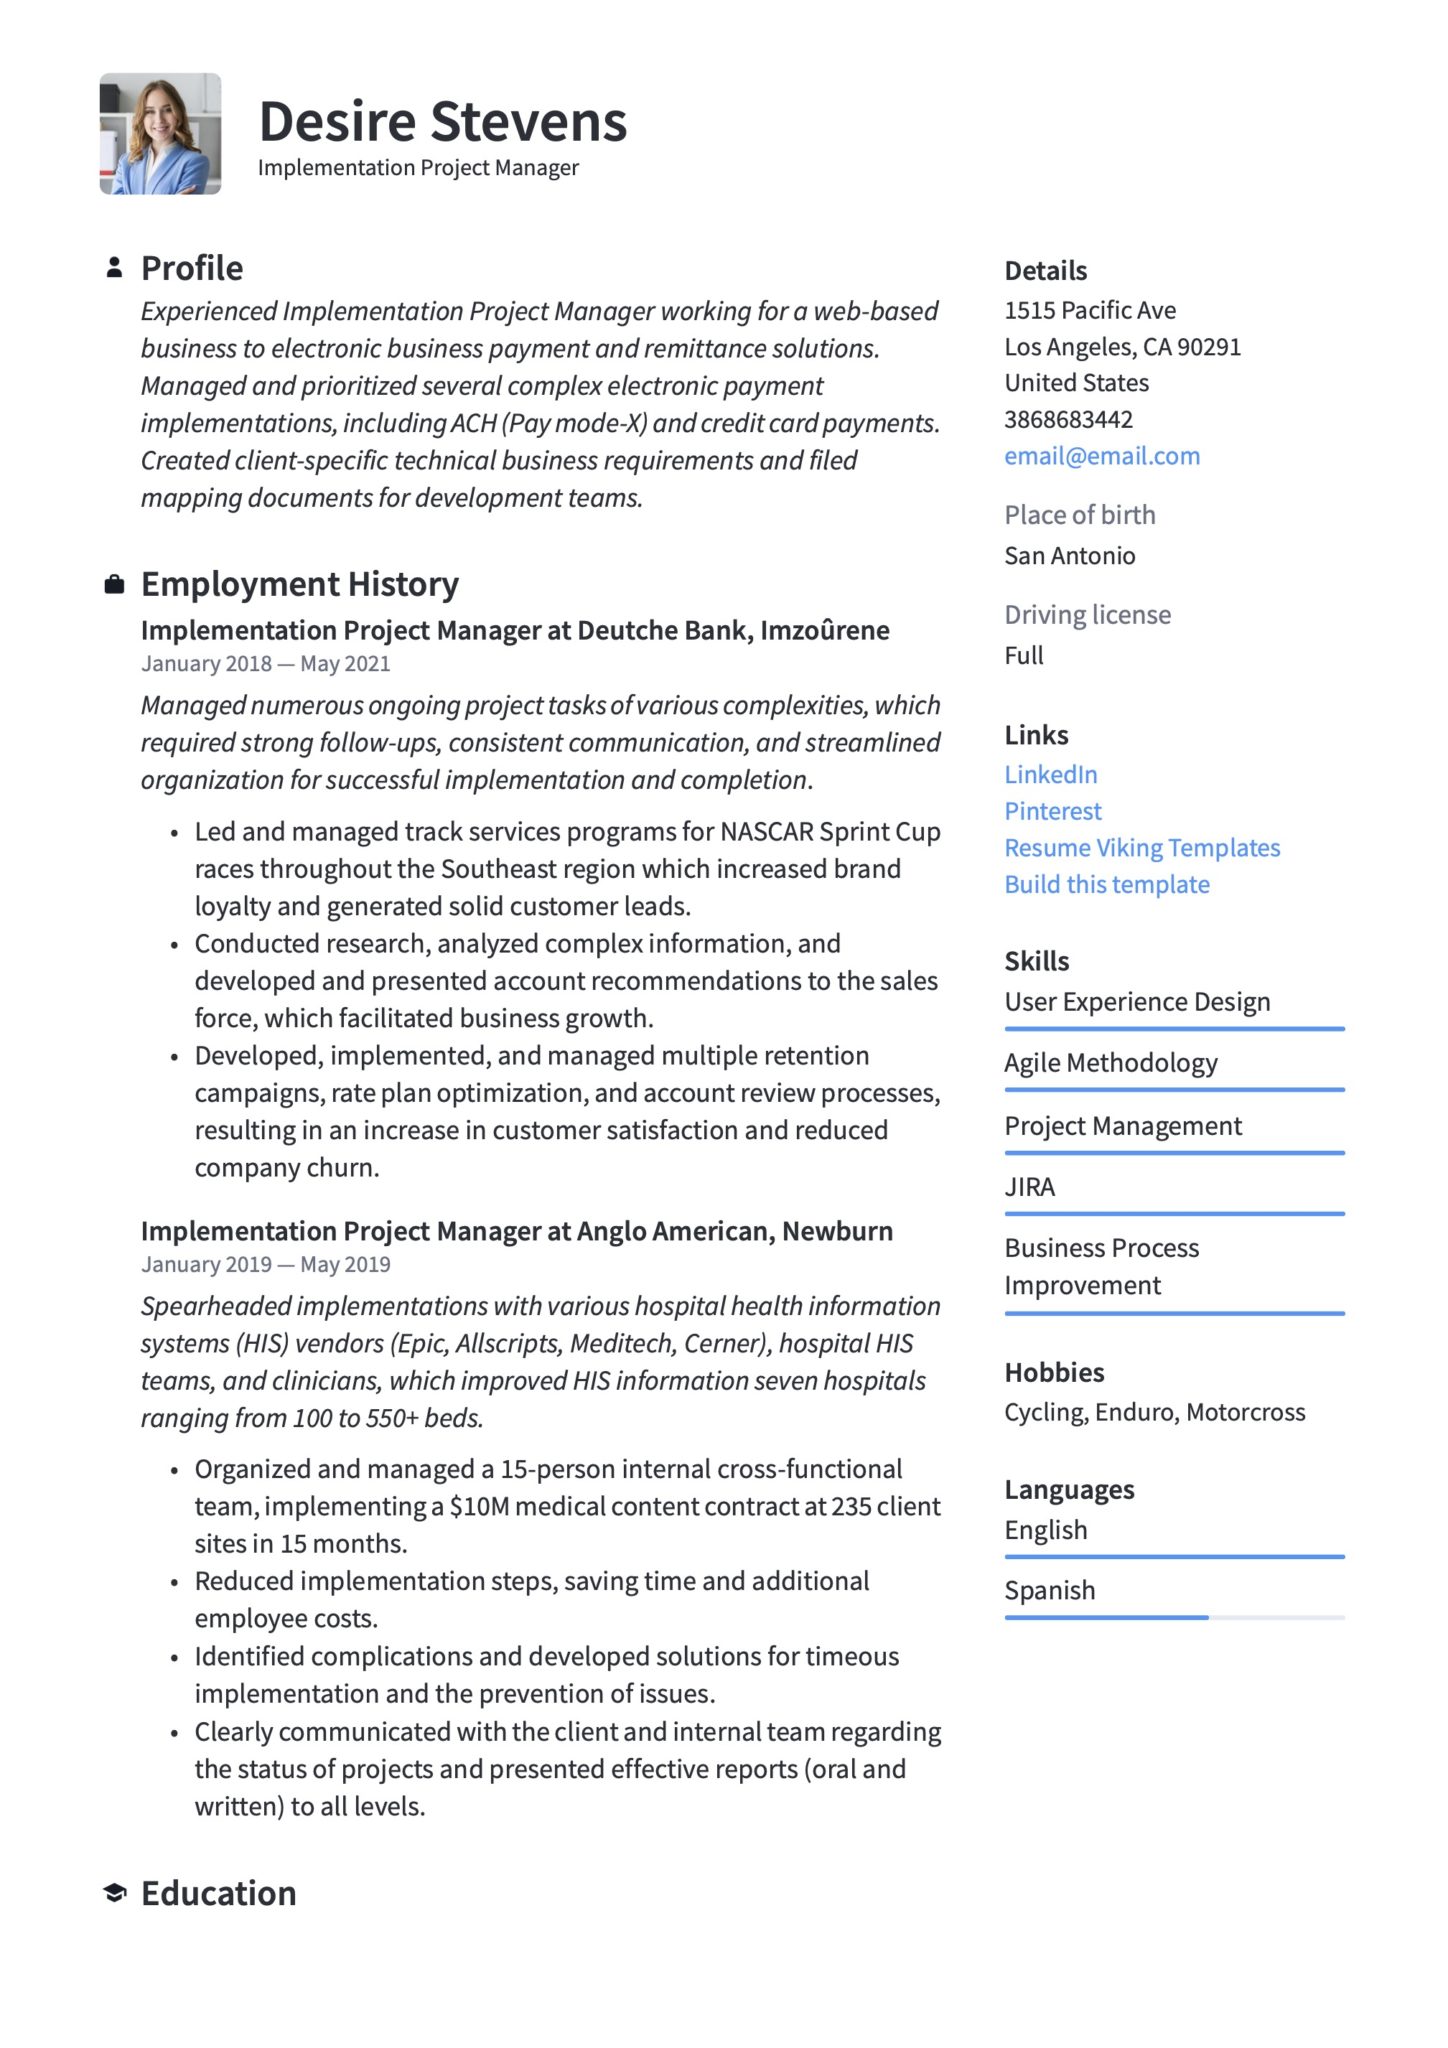 Implementation Project Manager Resume Template